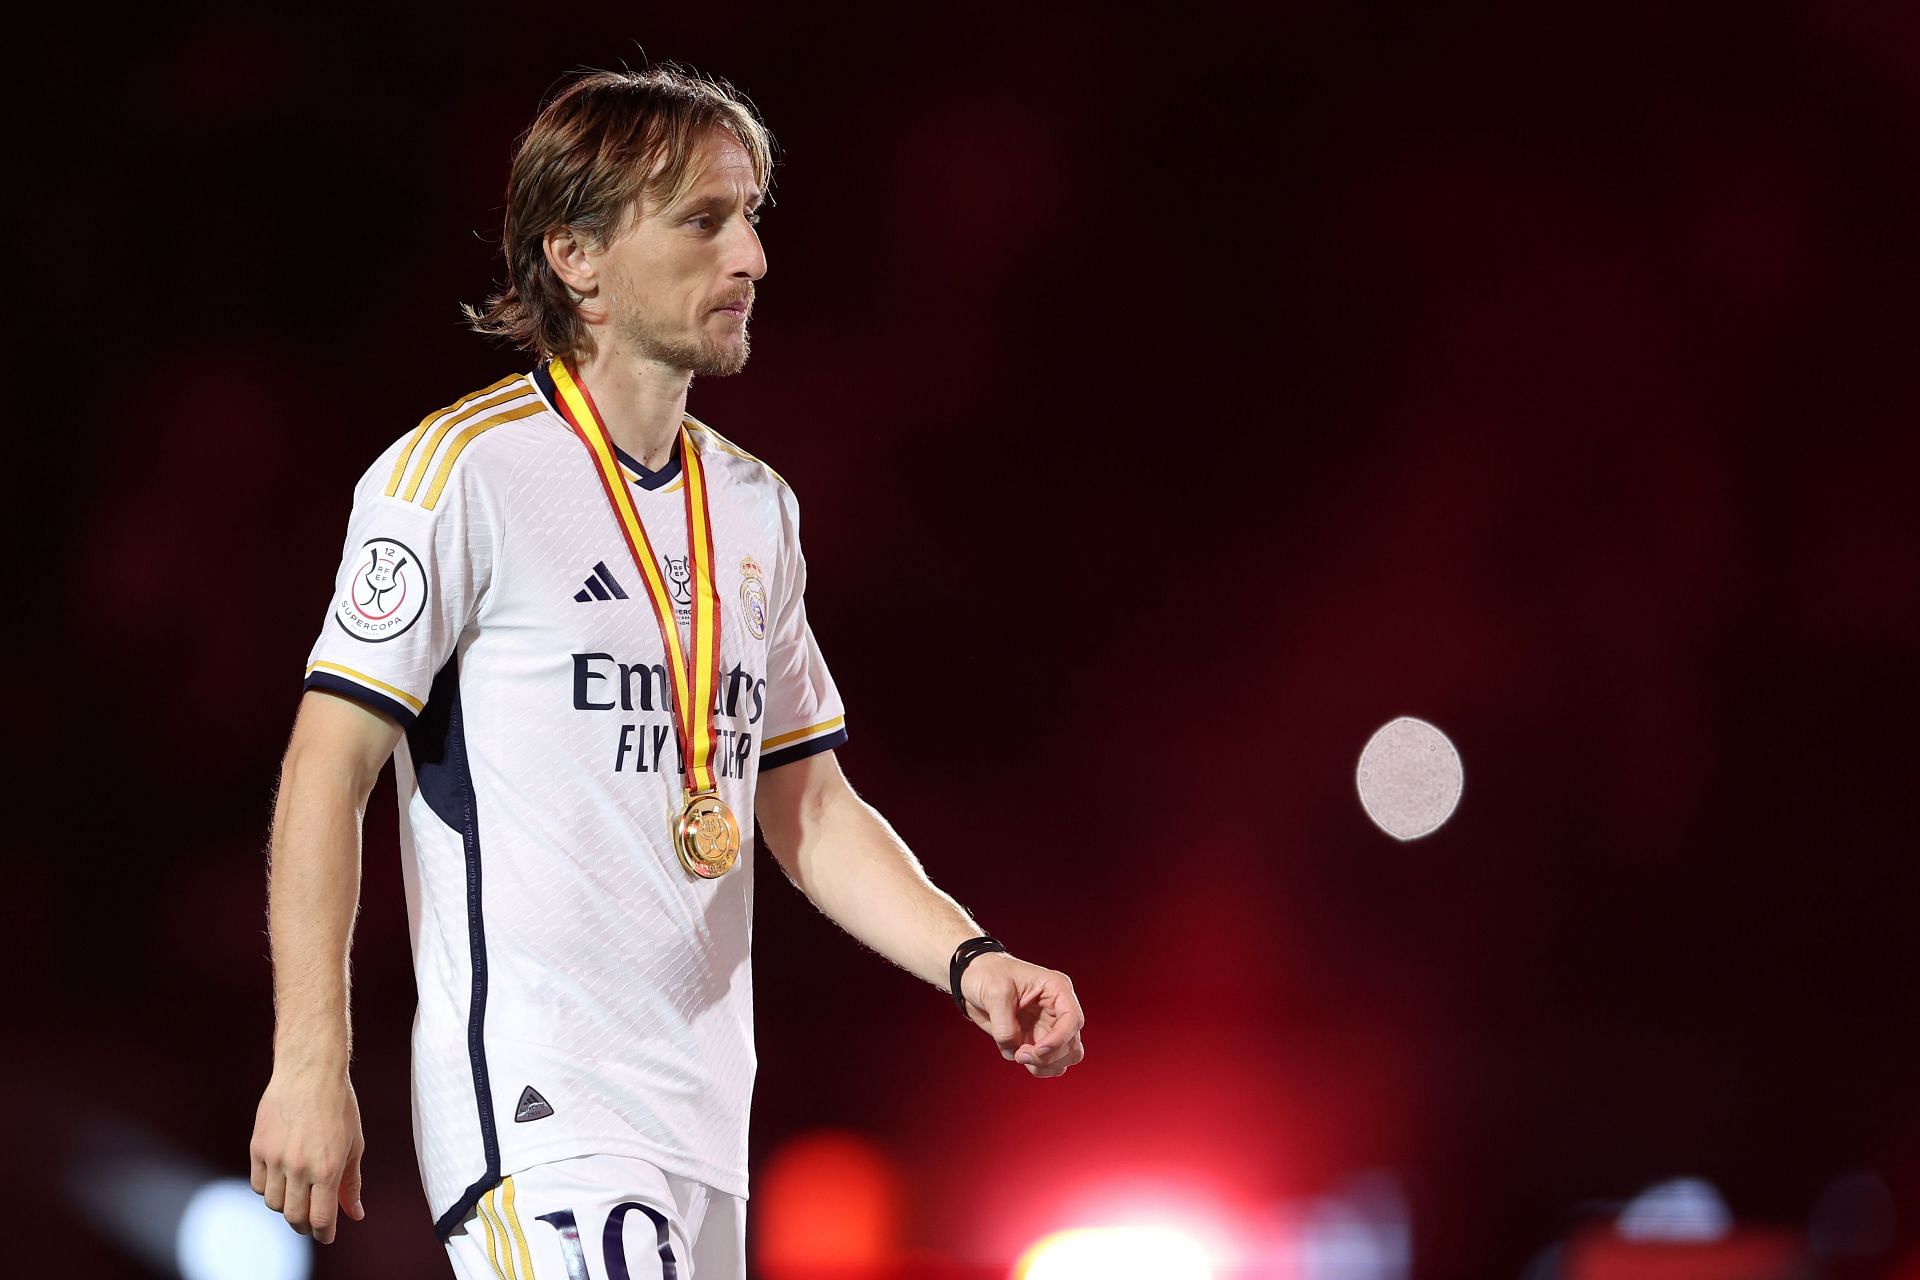 Modric bagged a stunning goal to win the game.